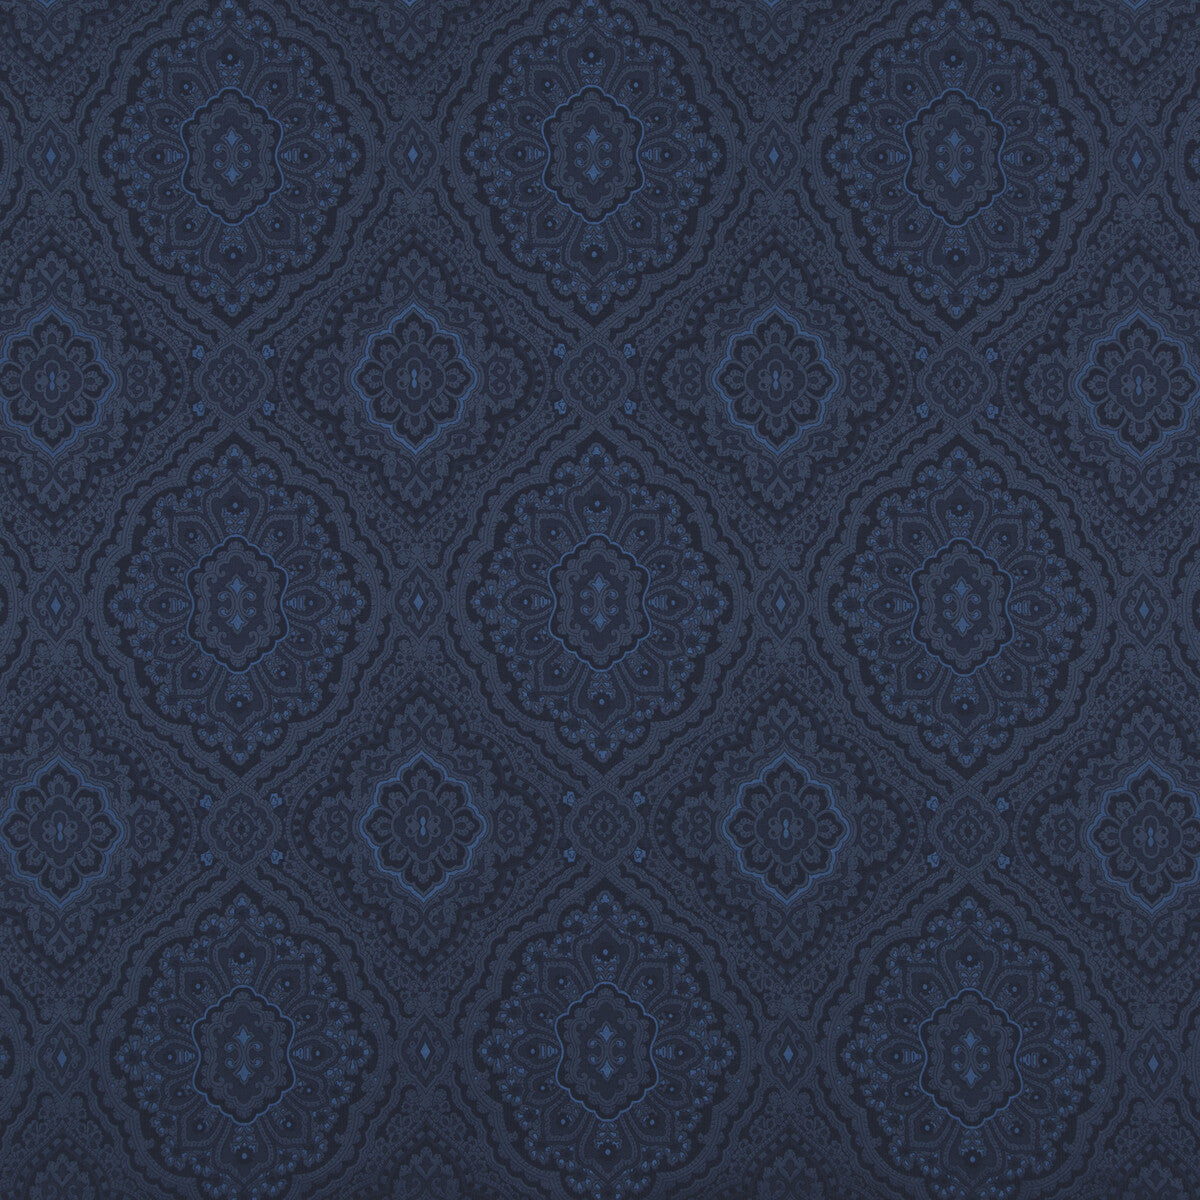 Edessa fabric in indigo color - pattern BF10710.4.0 - by G P &amp; J Baker in the East To West collection